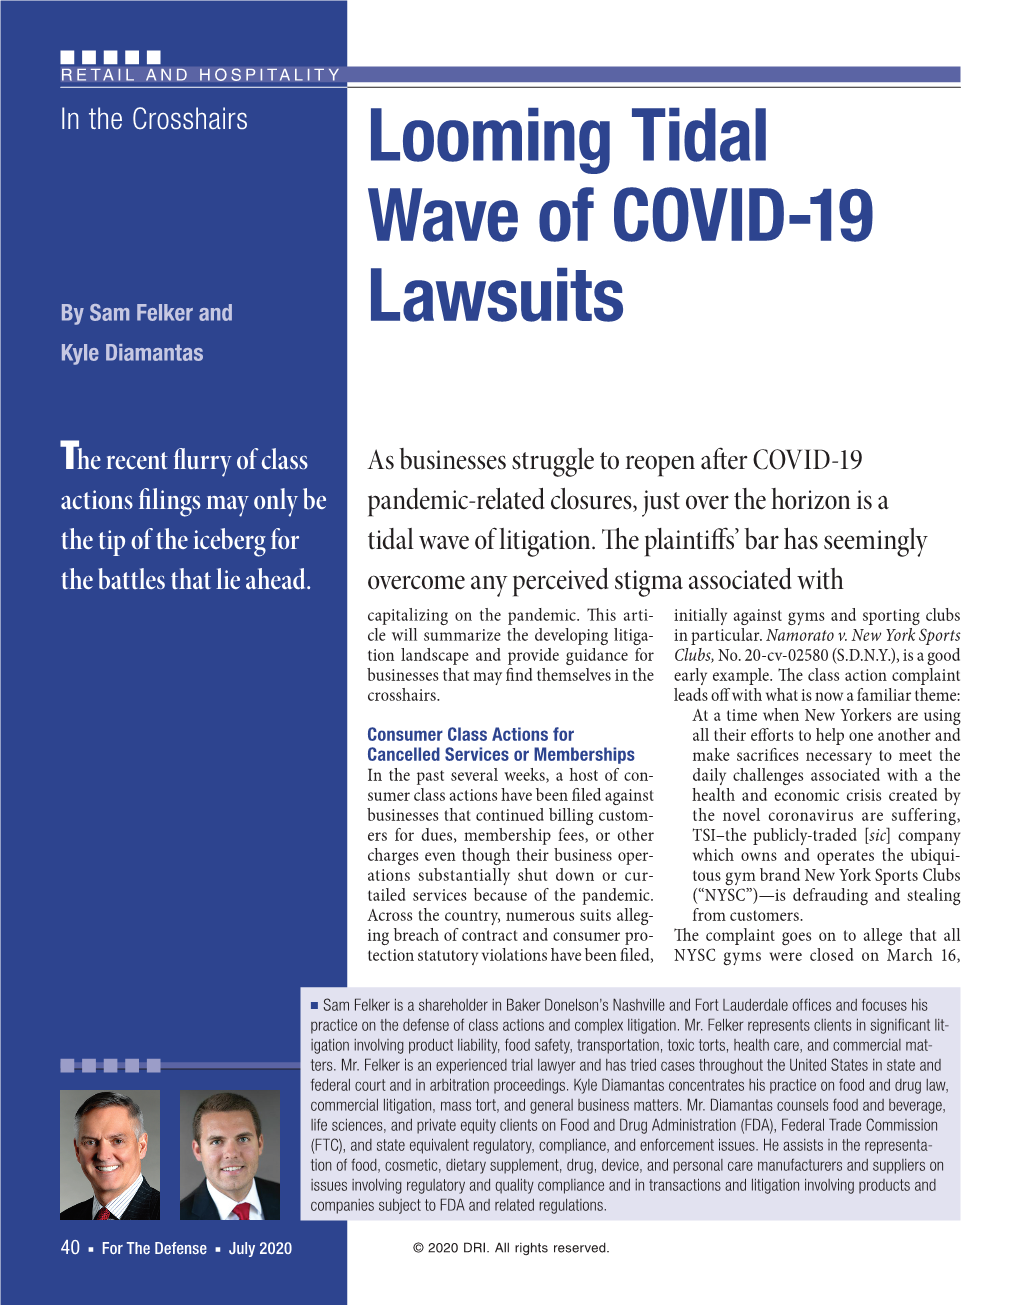 Looming Tidal Wave of COVID-19 Lawsuits